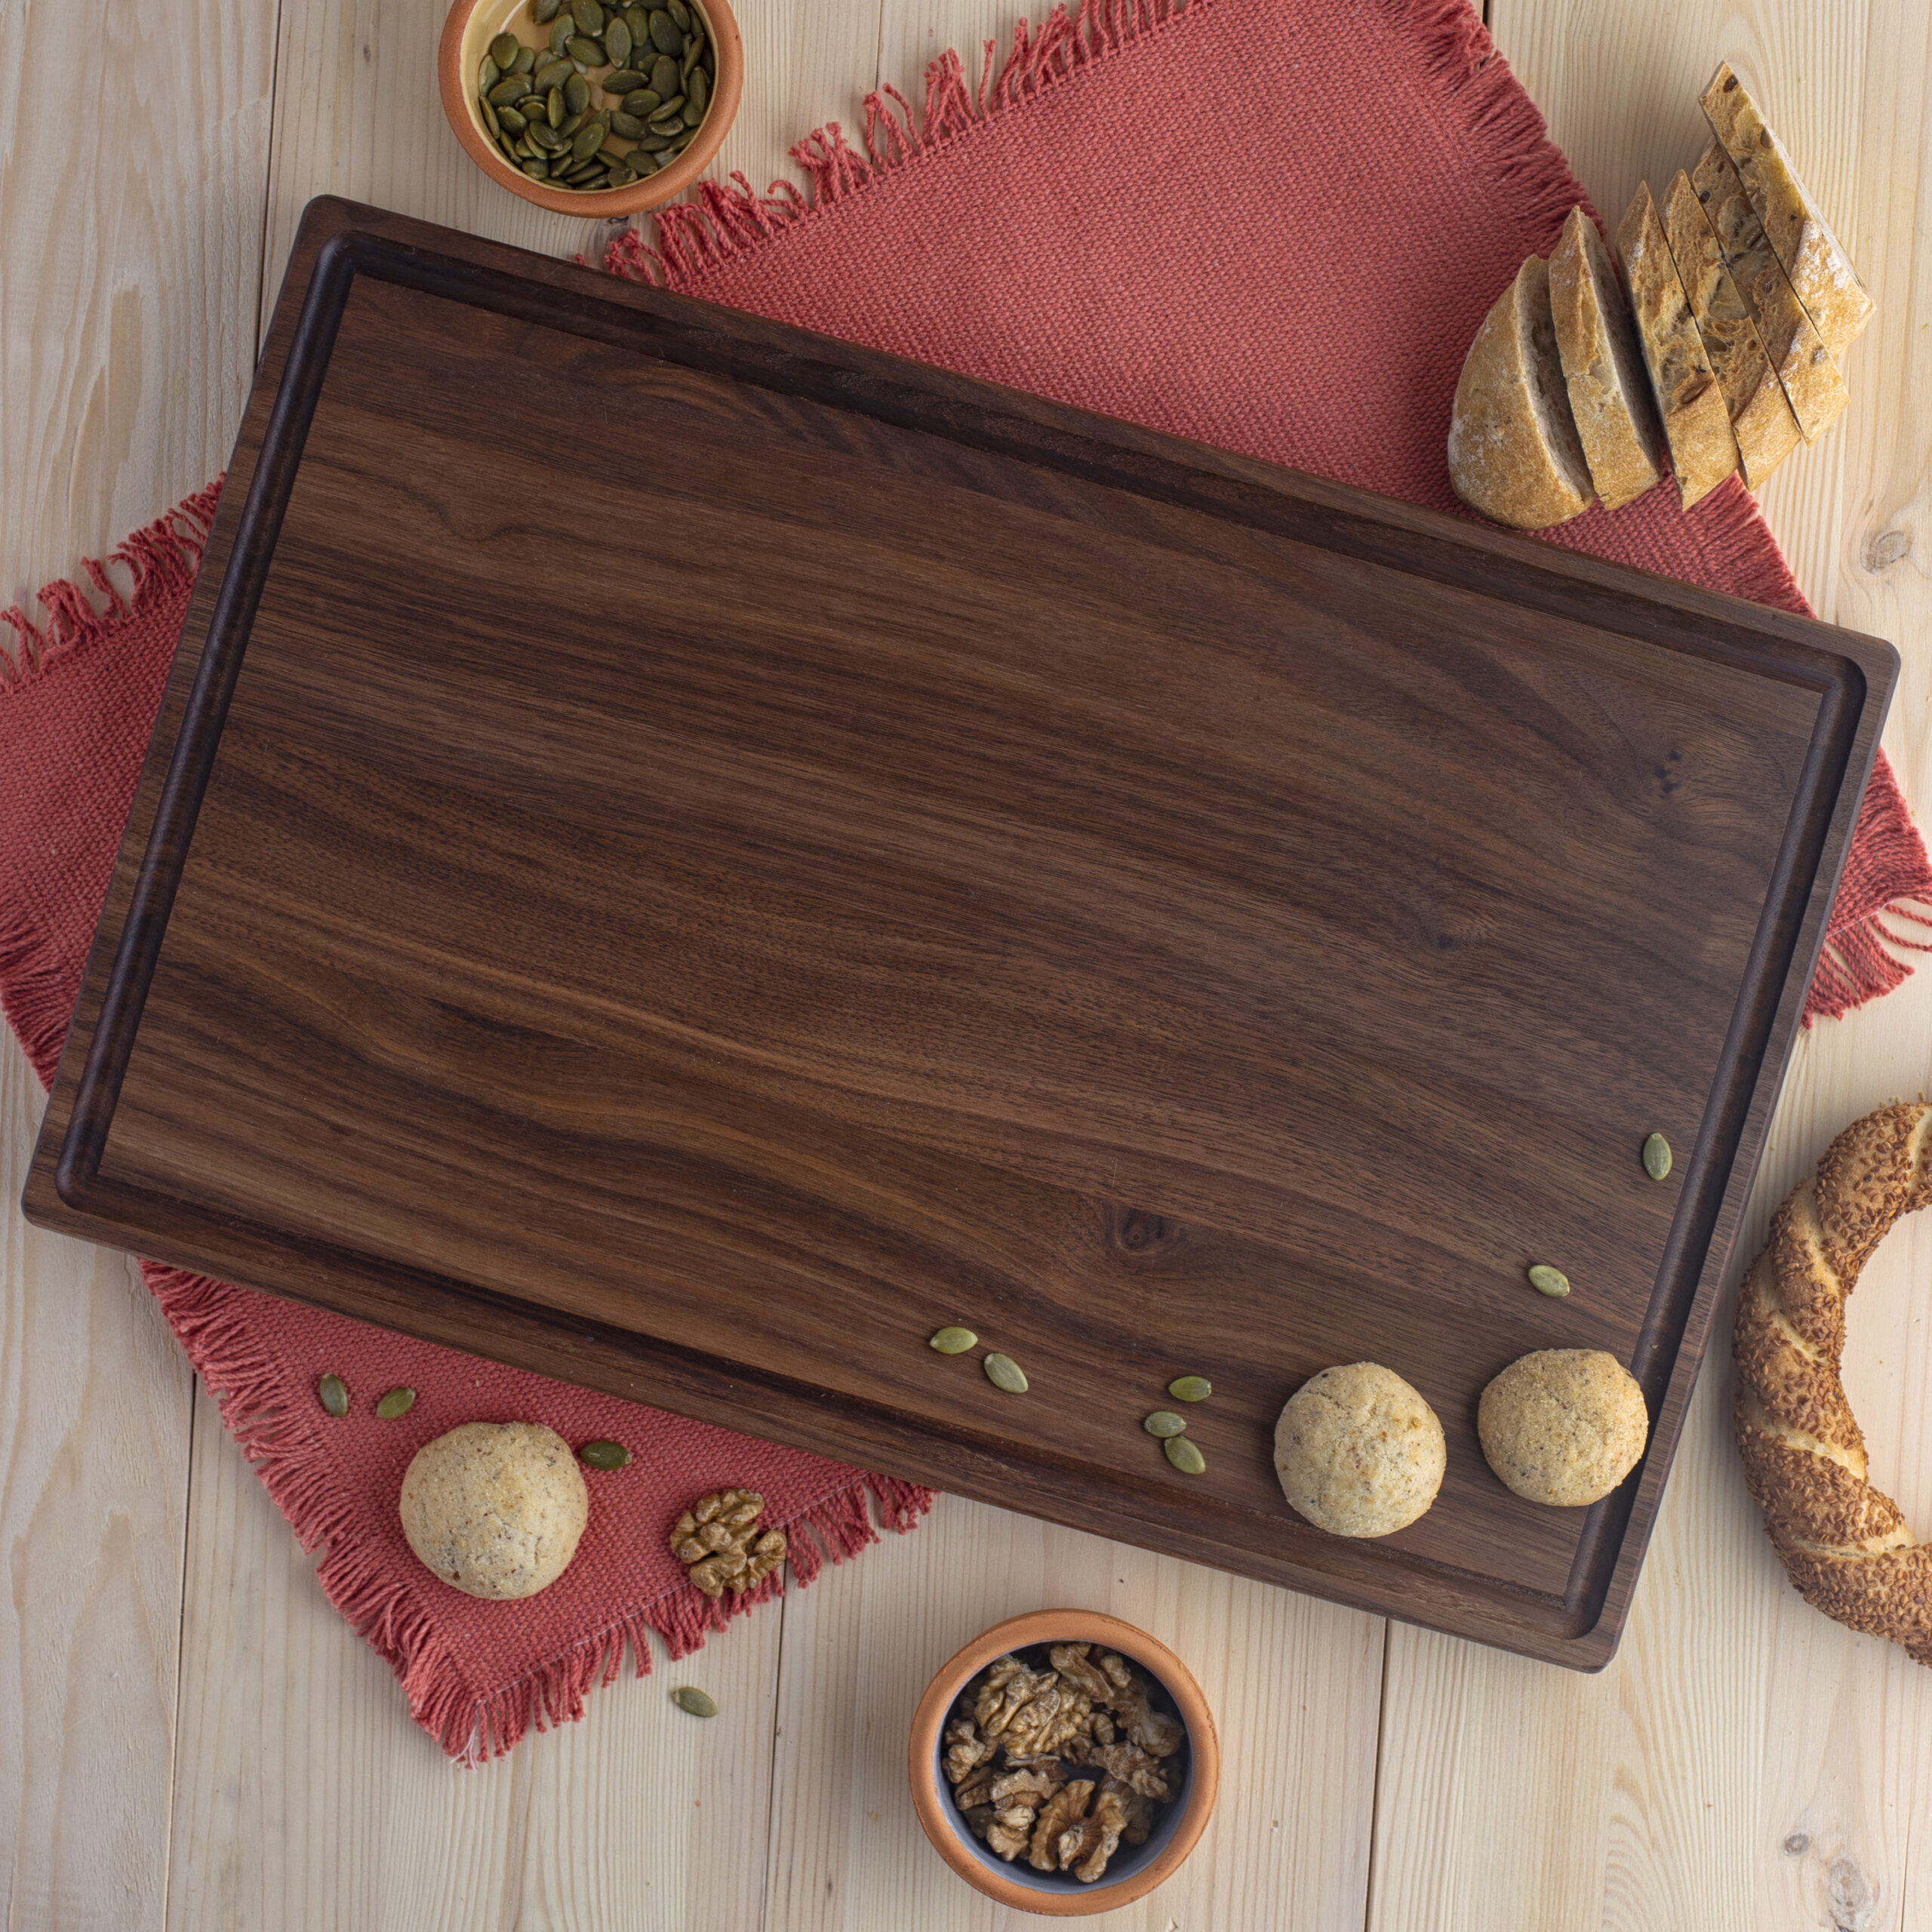 Large Walnut Cutting Board (17x11) with Juice Groove - Forest Decor